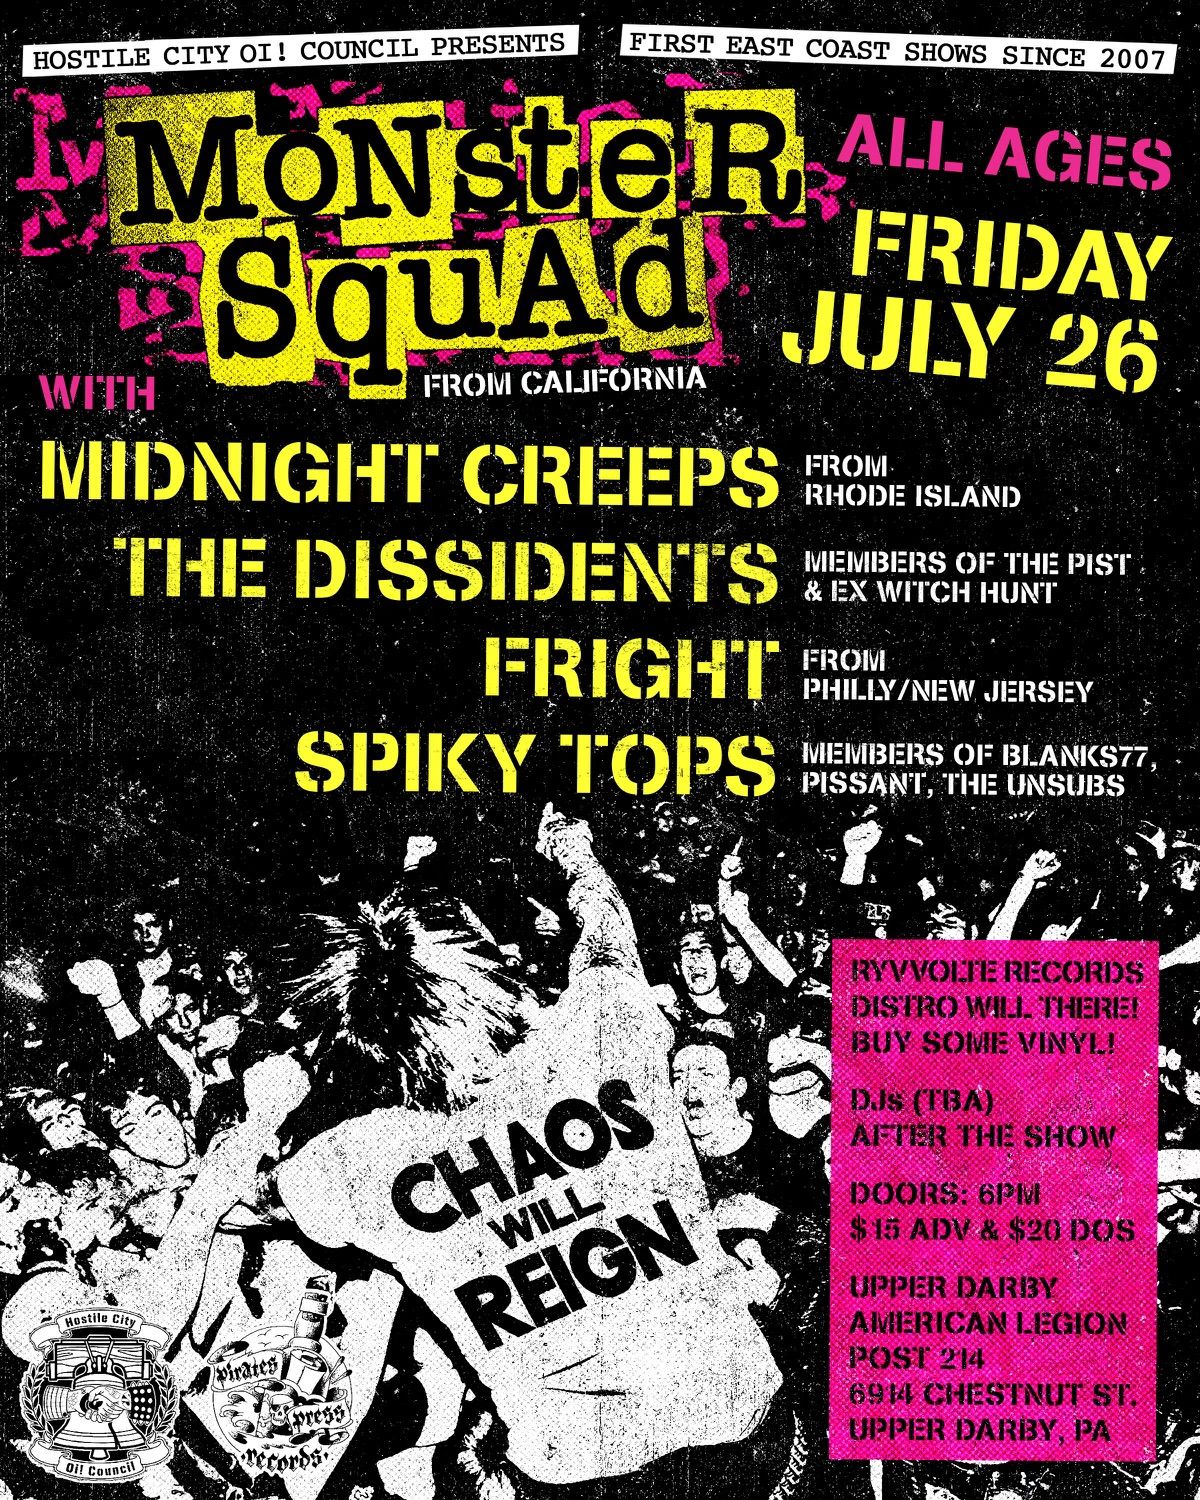 All Ages Punk Show ft. Monster Squad, Midnight Creeps, The Dissidents, Fright, Spiky Tops in Philly 